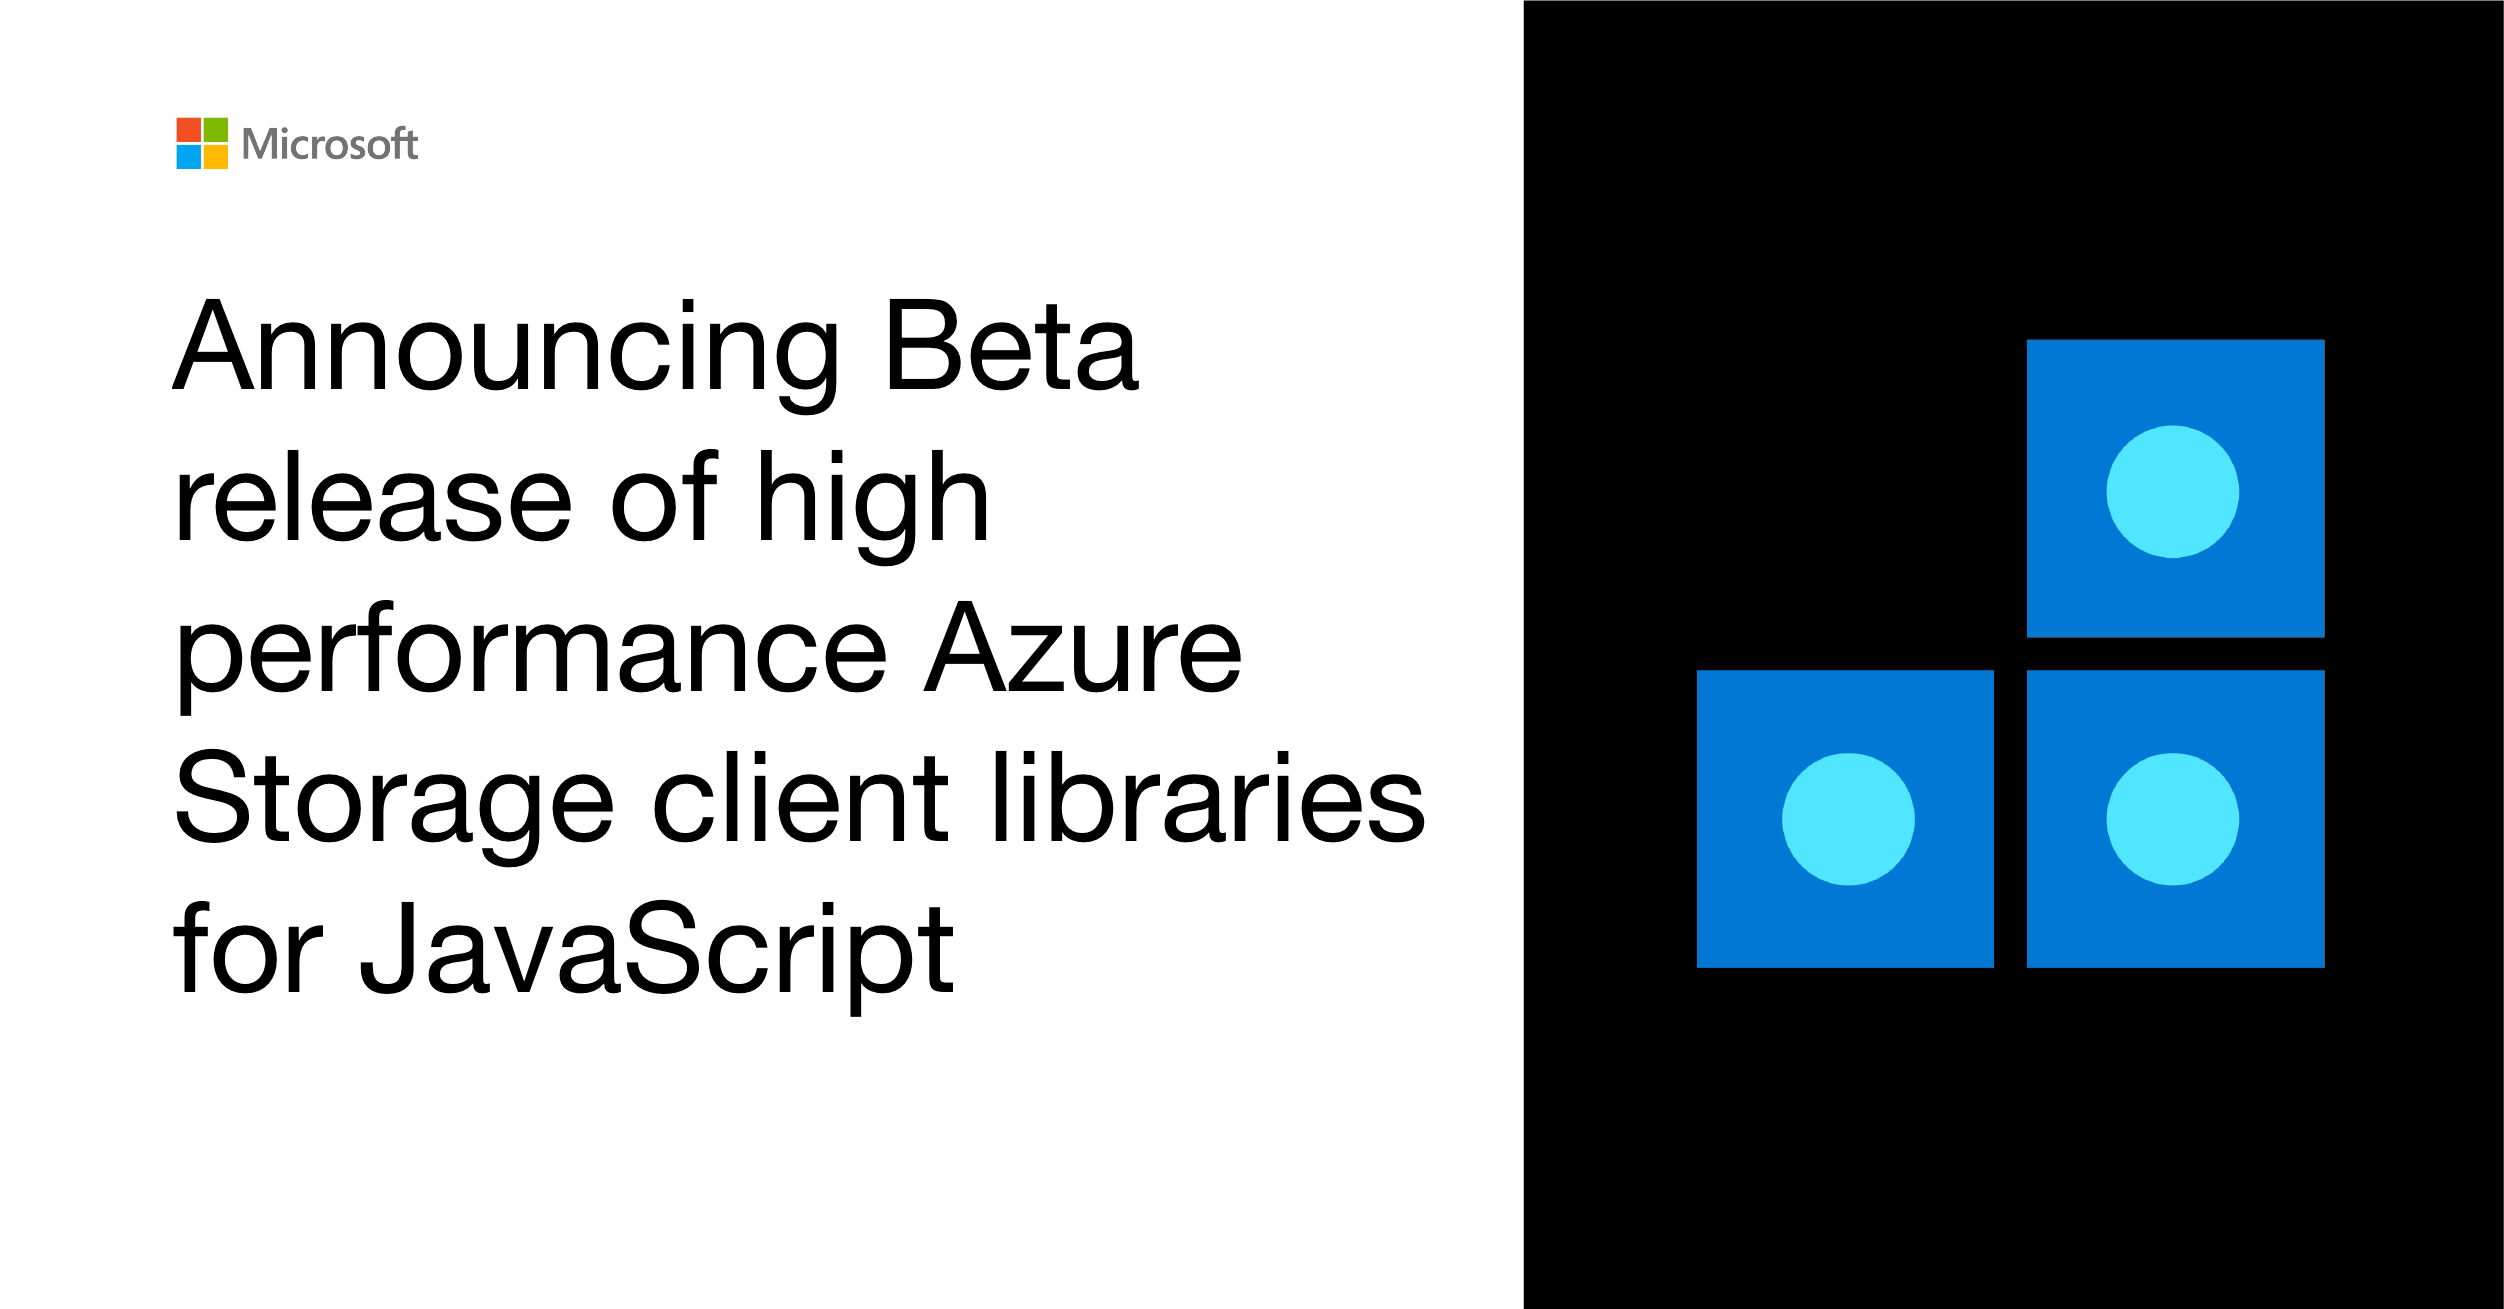 Announcing the new (more performant!) Beta release of Azure Storage client libraries for JavaScript